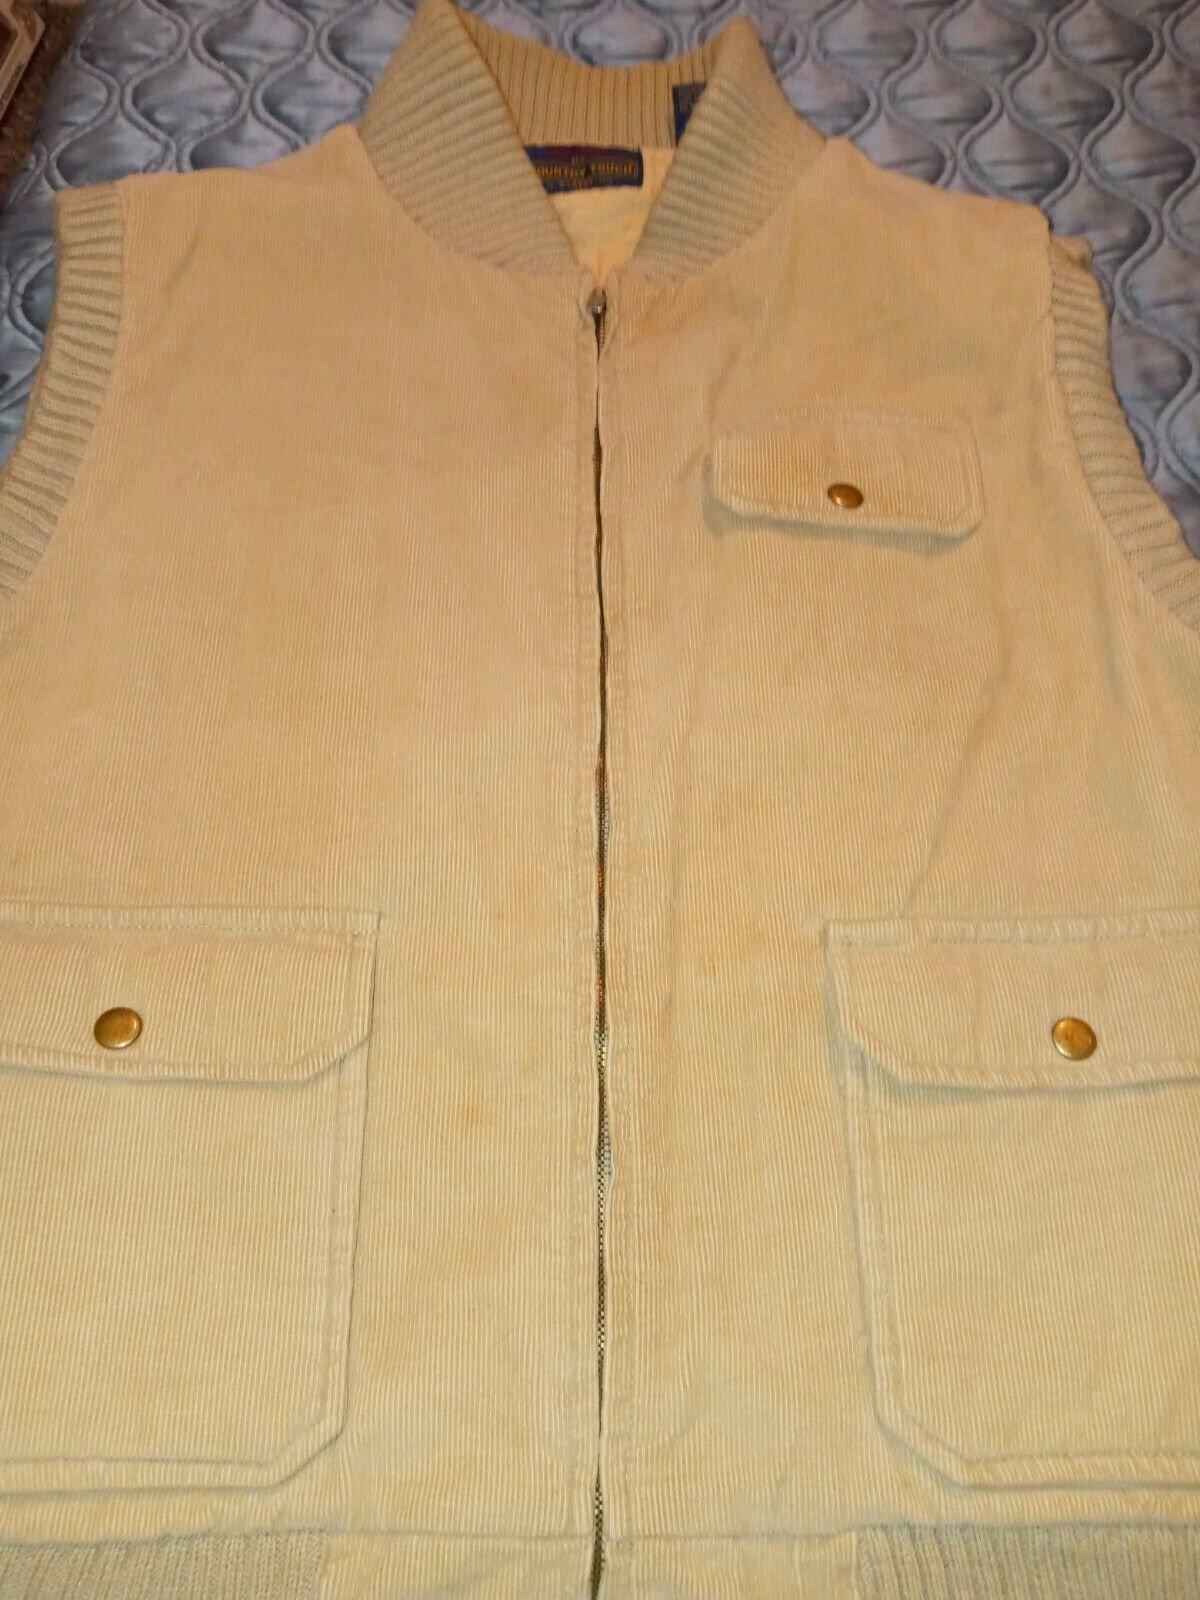 Sportswear By Country Touch Quilted Tan Corduroy Men Vest Vintage Xl 17-17 1/2